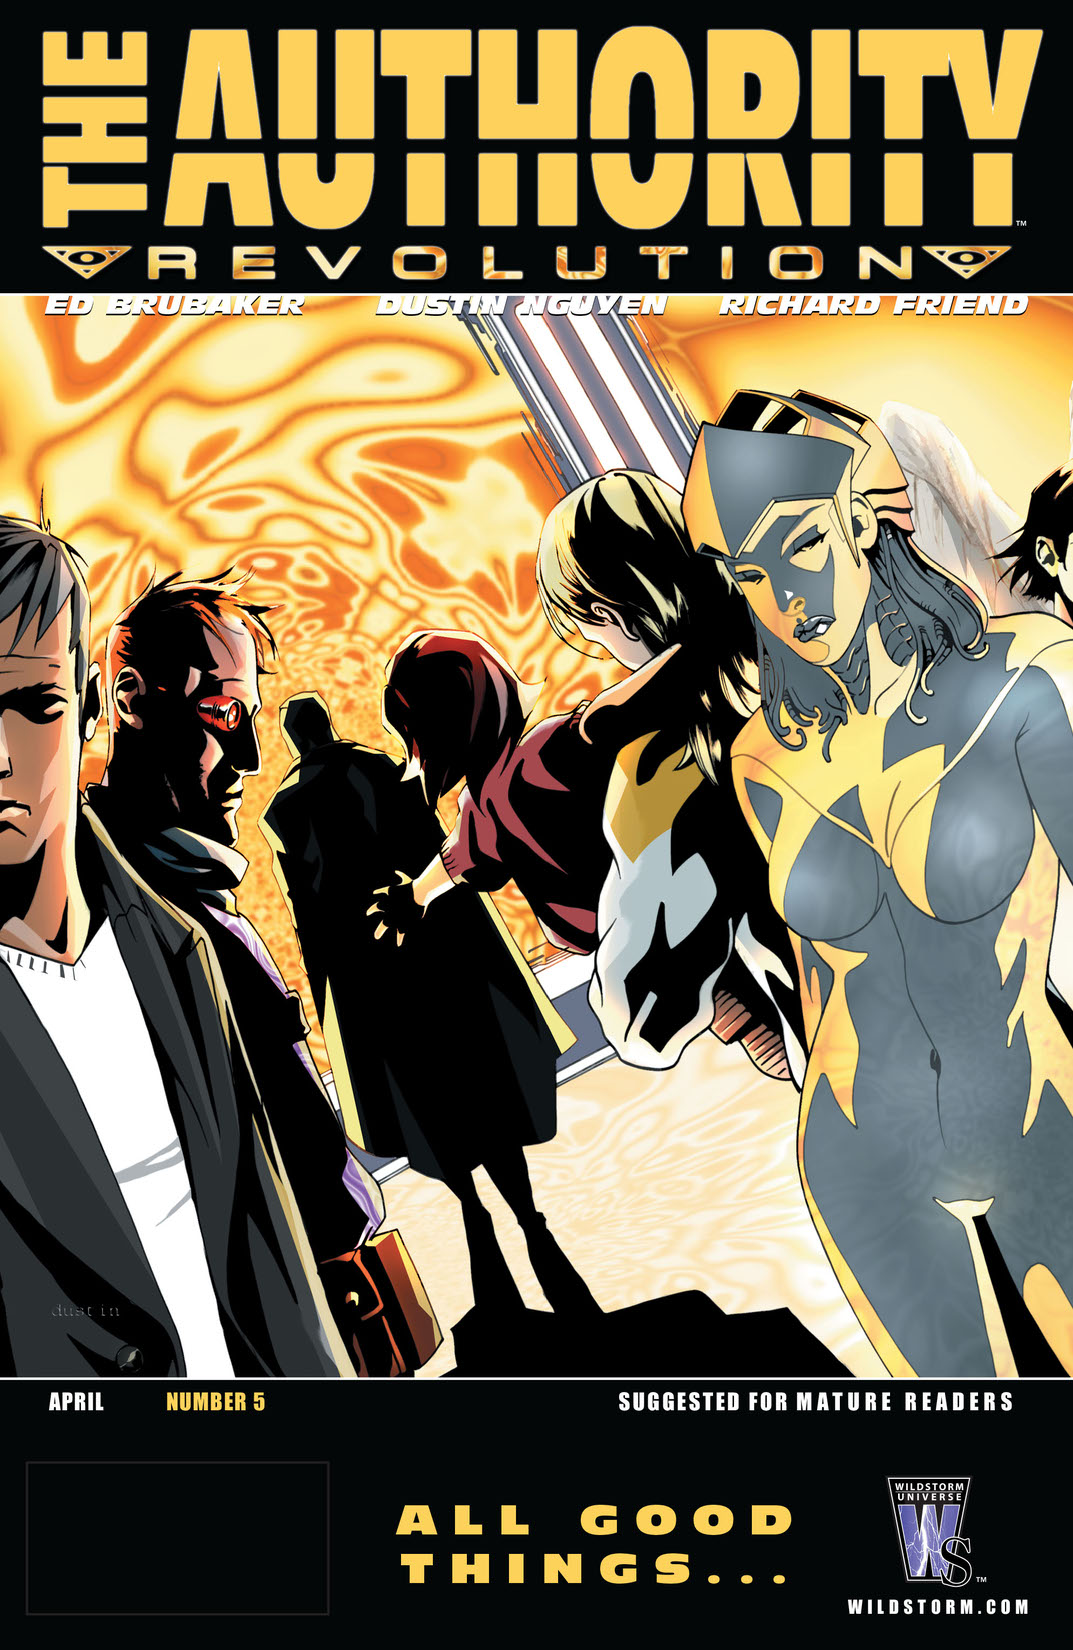 The Authority Revolution #5 preview images